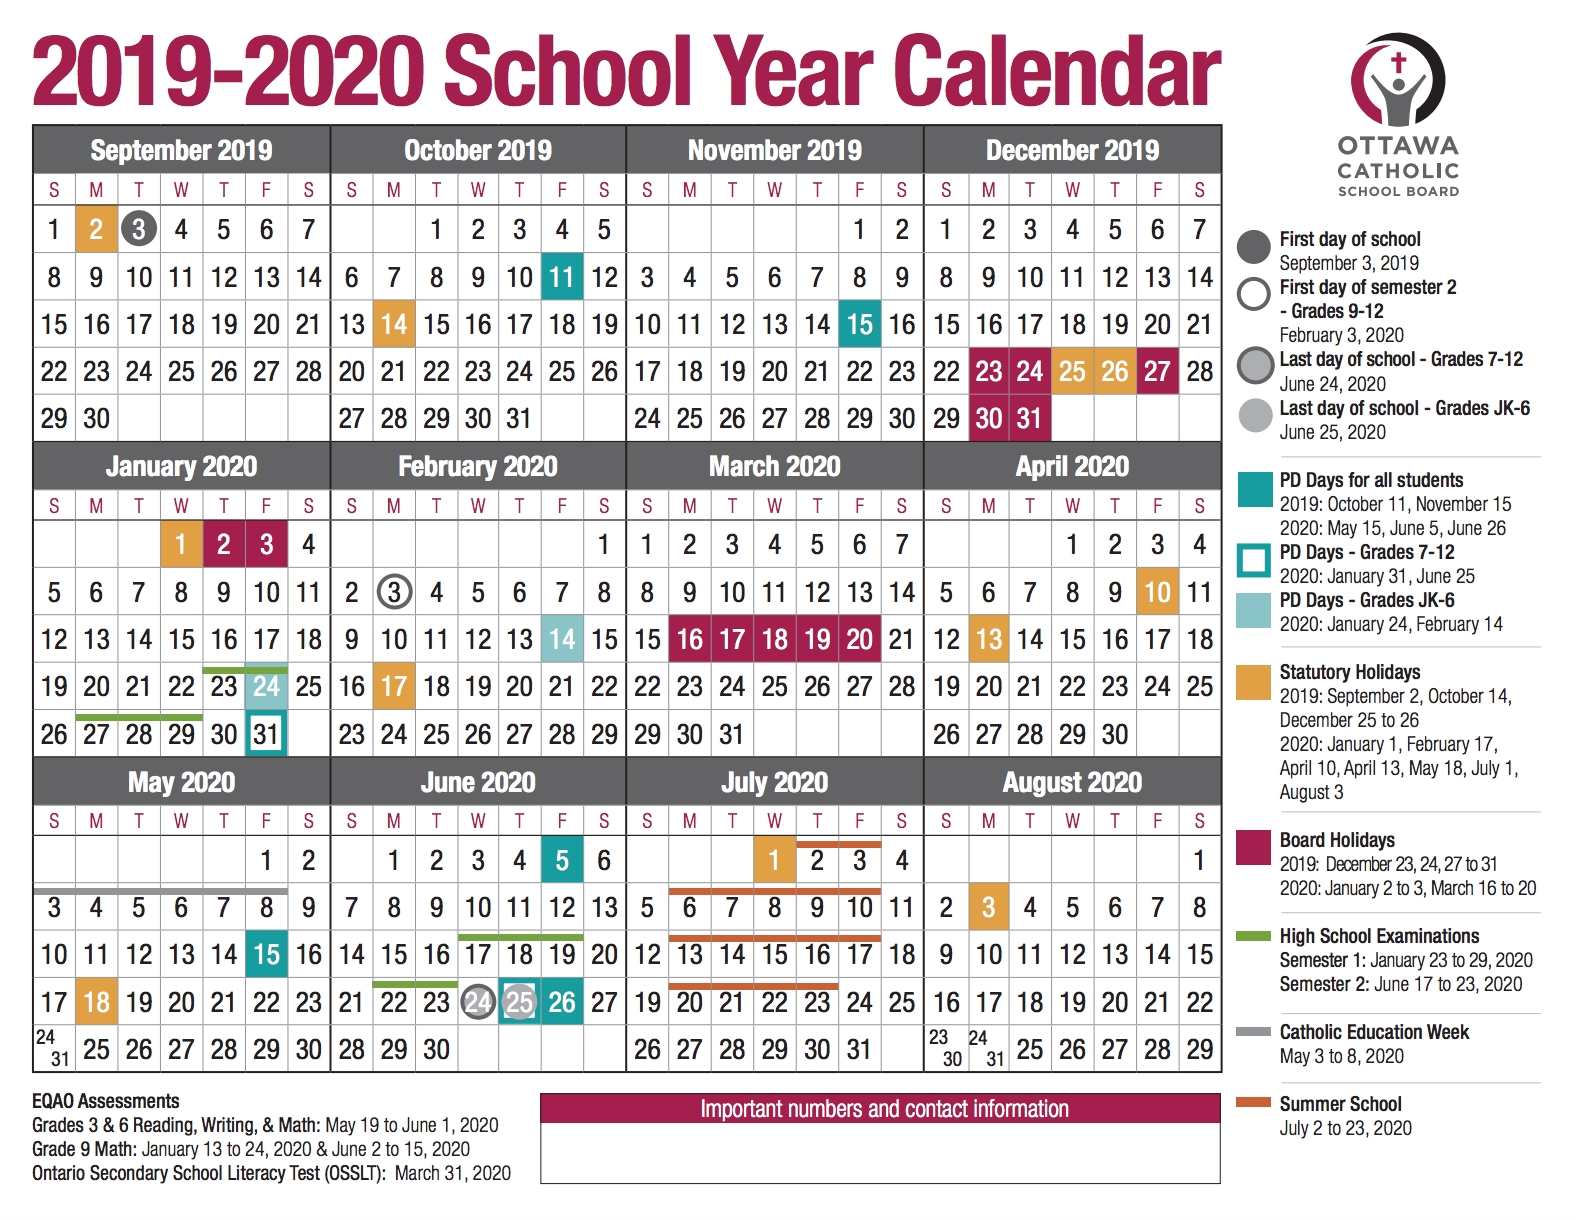 School Year Calendar From The Ocsb within Special Days For Schools 2019 - 2020